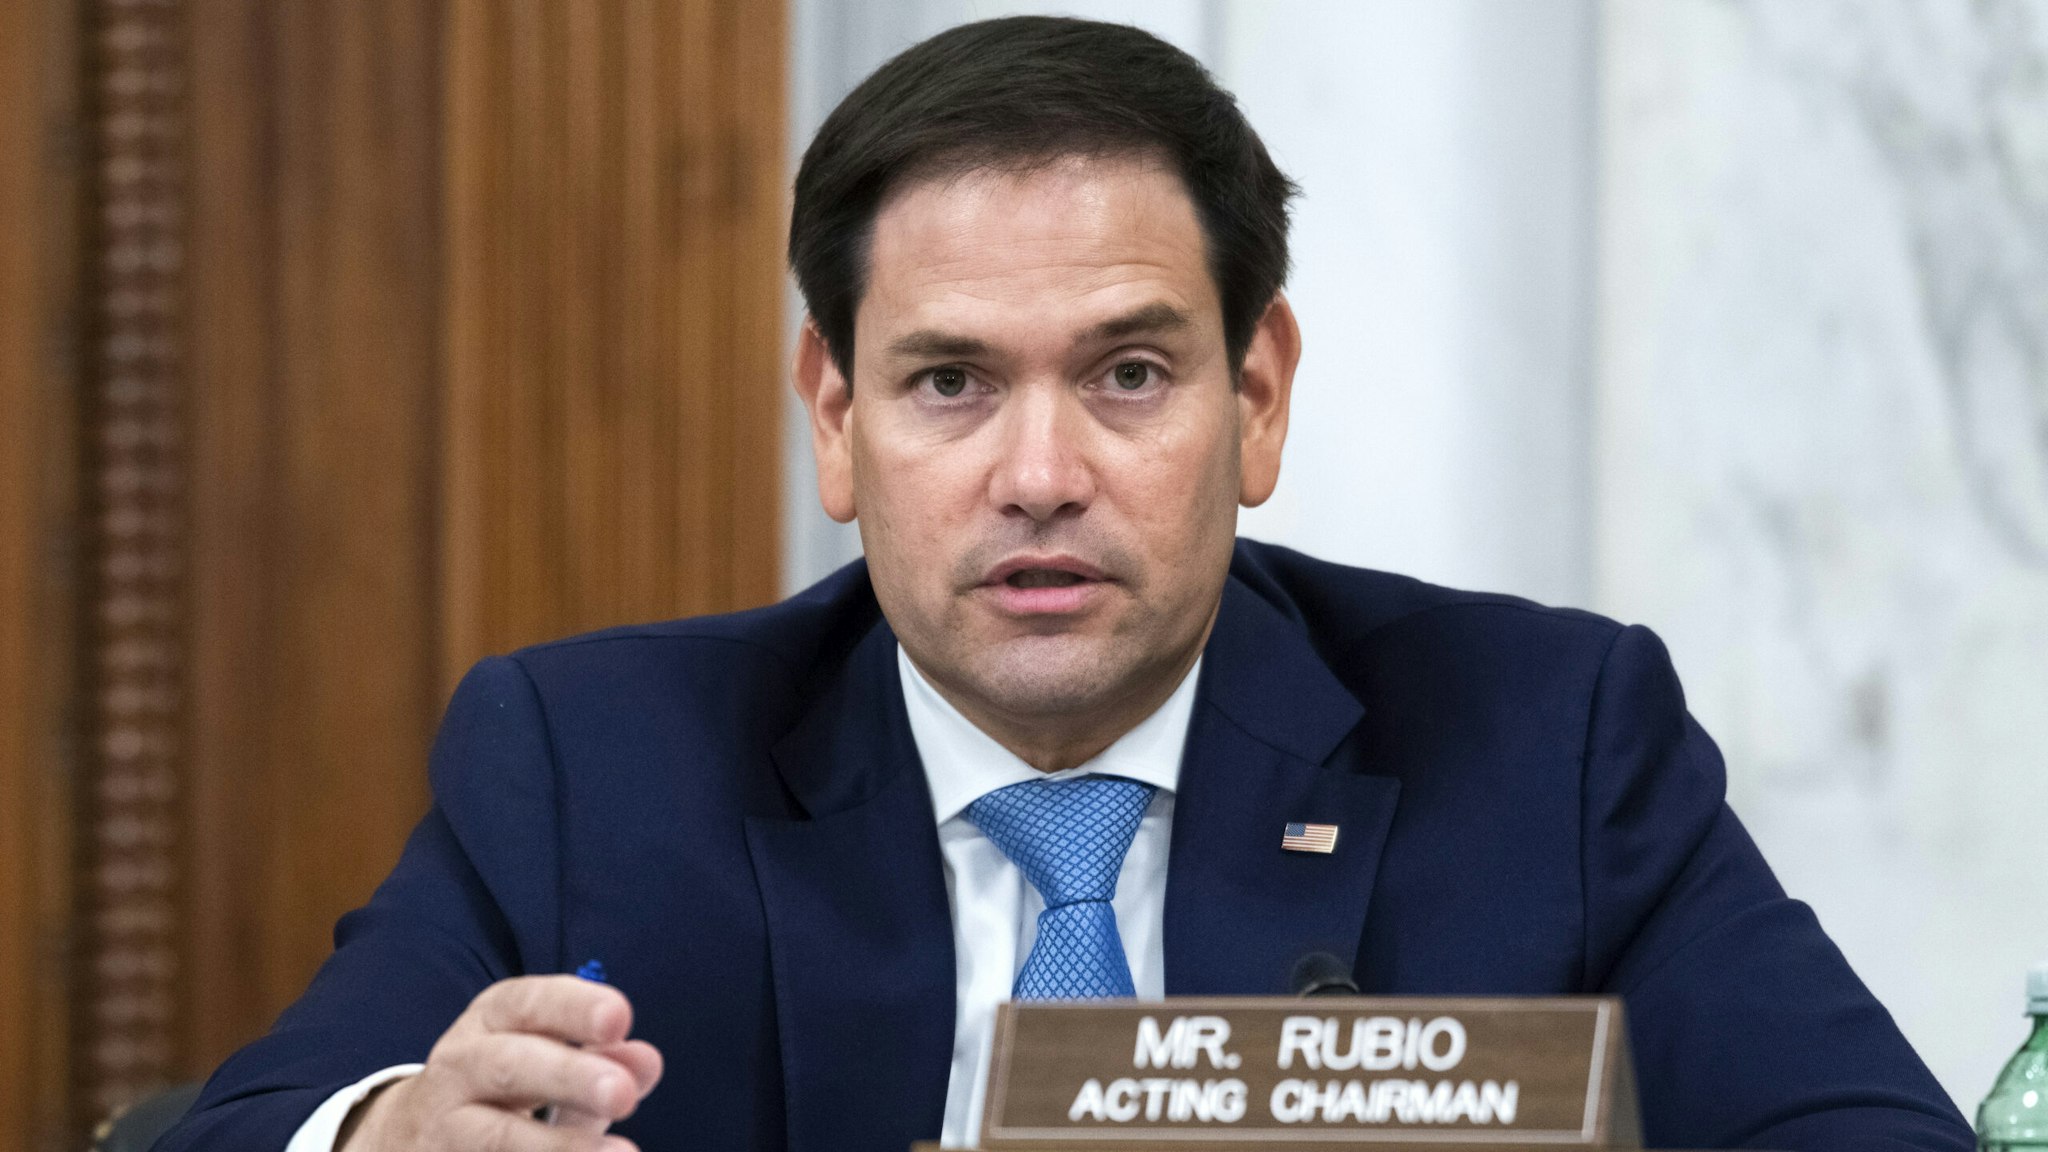 UNITED STATES - JUNE 24: Acting Chairman Sen. Marco Rubio, R-Fla., conducts the Senate Select Intelligence Committee confirmation hearing for Peter Michael Thomson, nominee to be inspector general of the Central Intelligence Agency, in Russell Building on Wednesday, June 24, 2020.